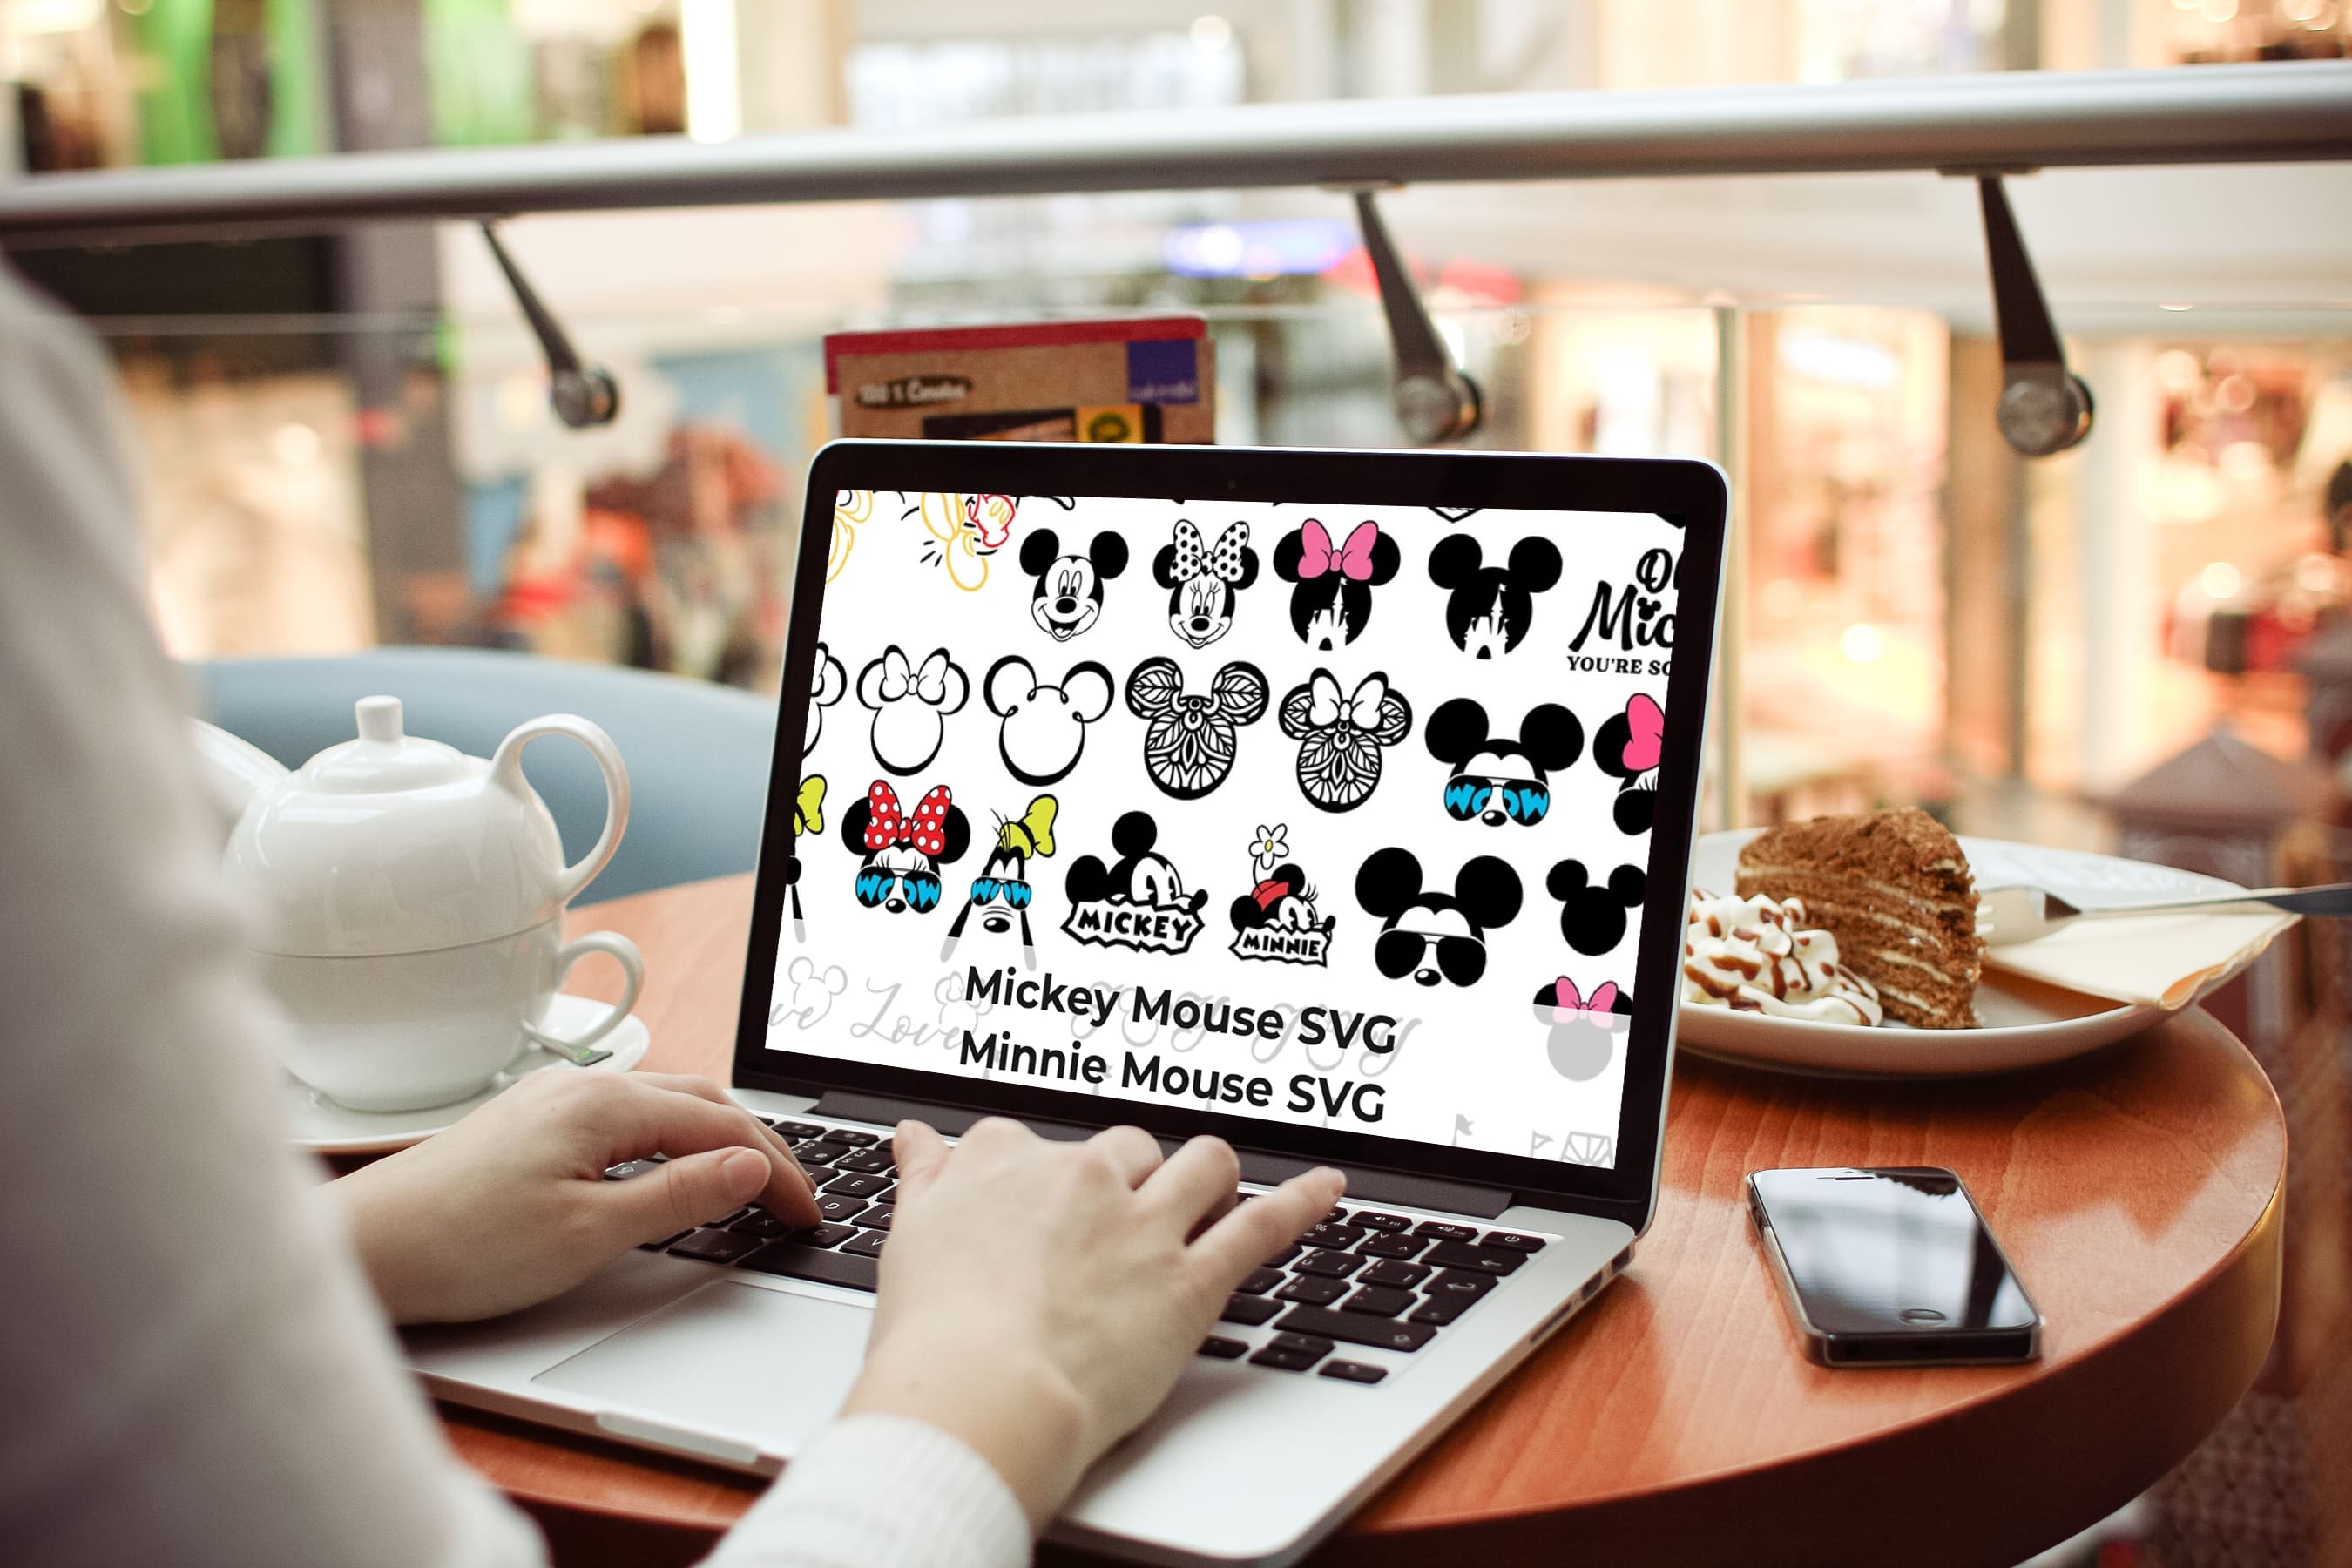 Laptop - Mickey Mouse SVG, Minnie Mouse SVG, Mickey Head, Minnie Bow.